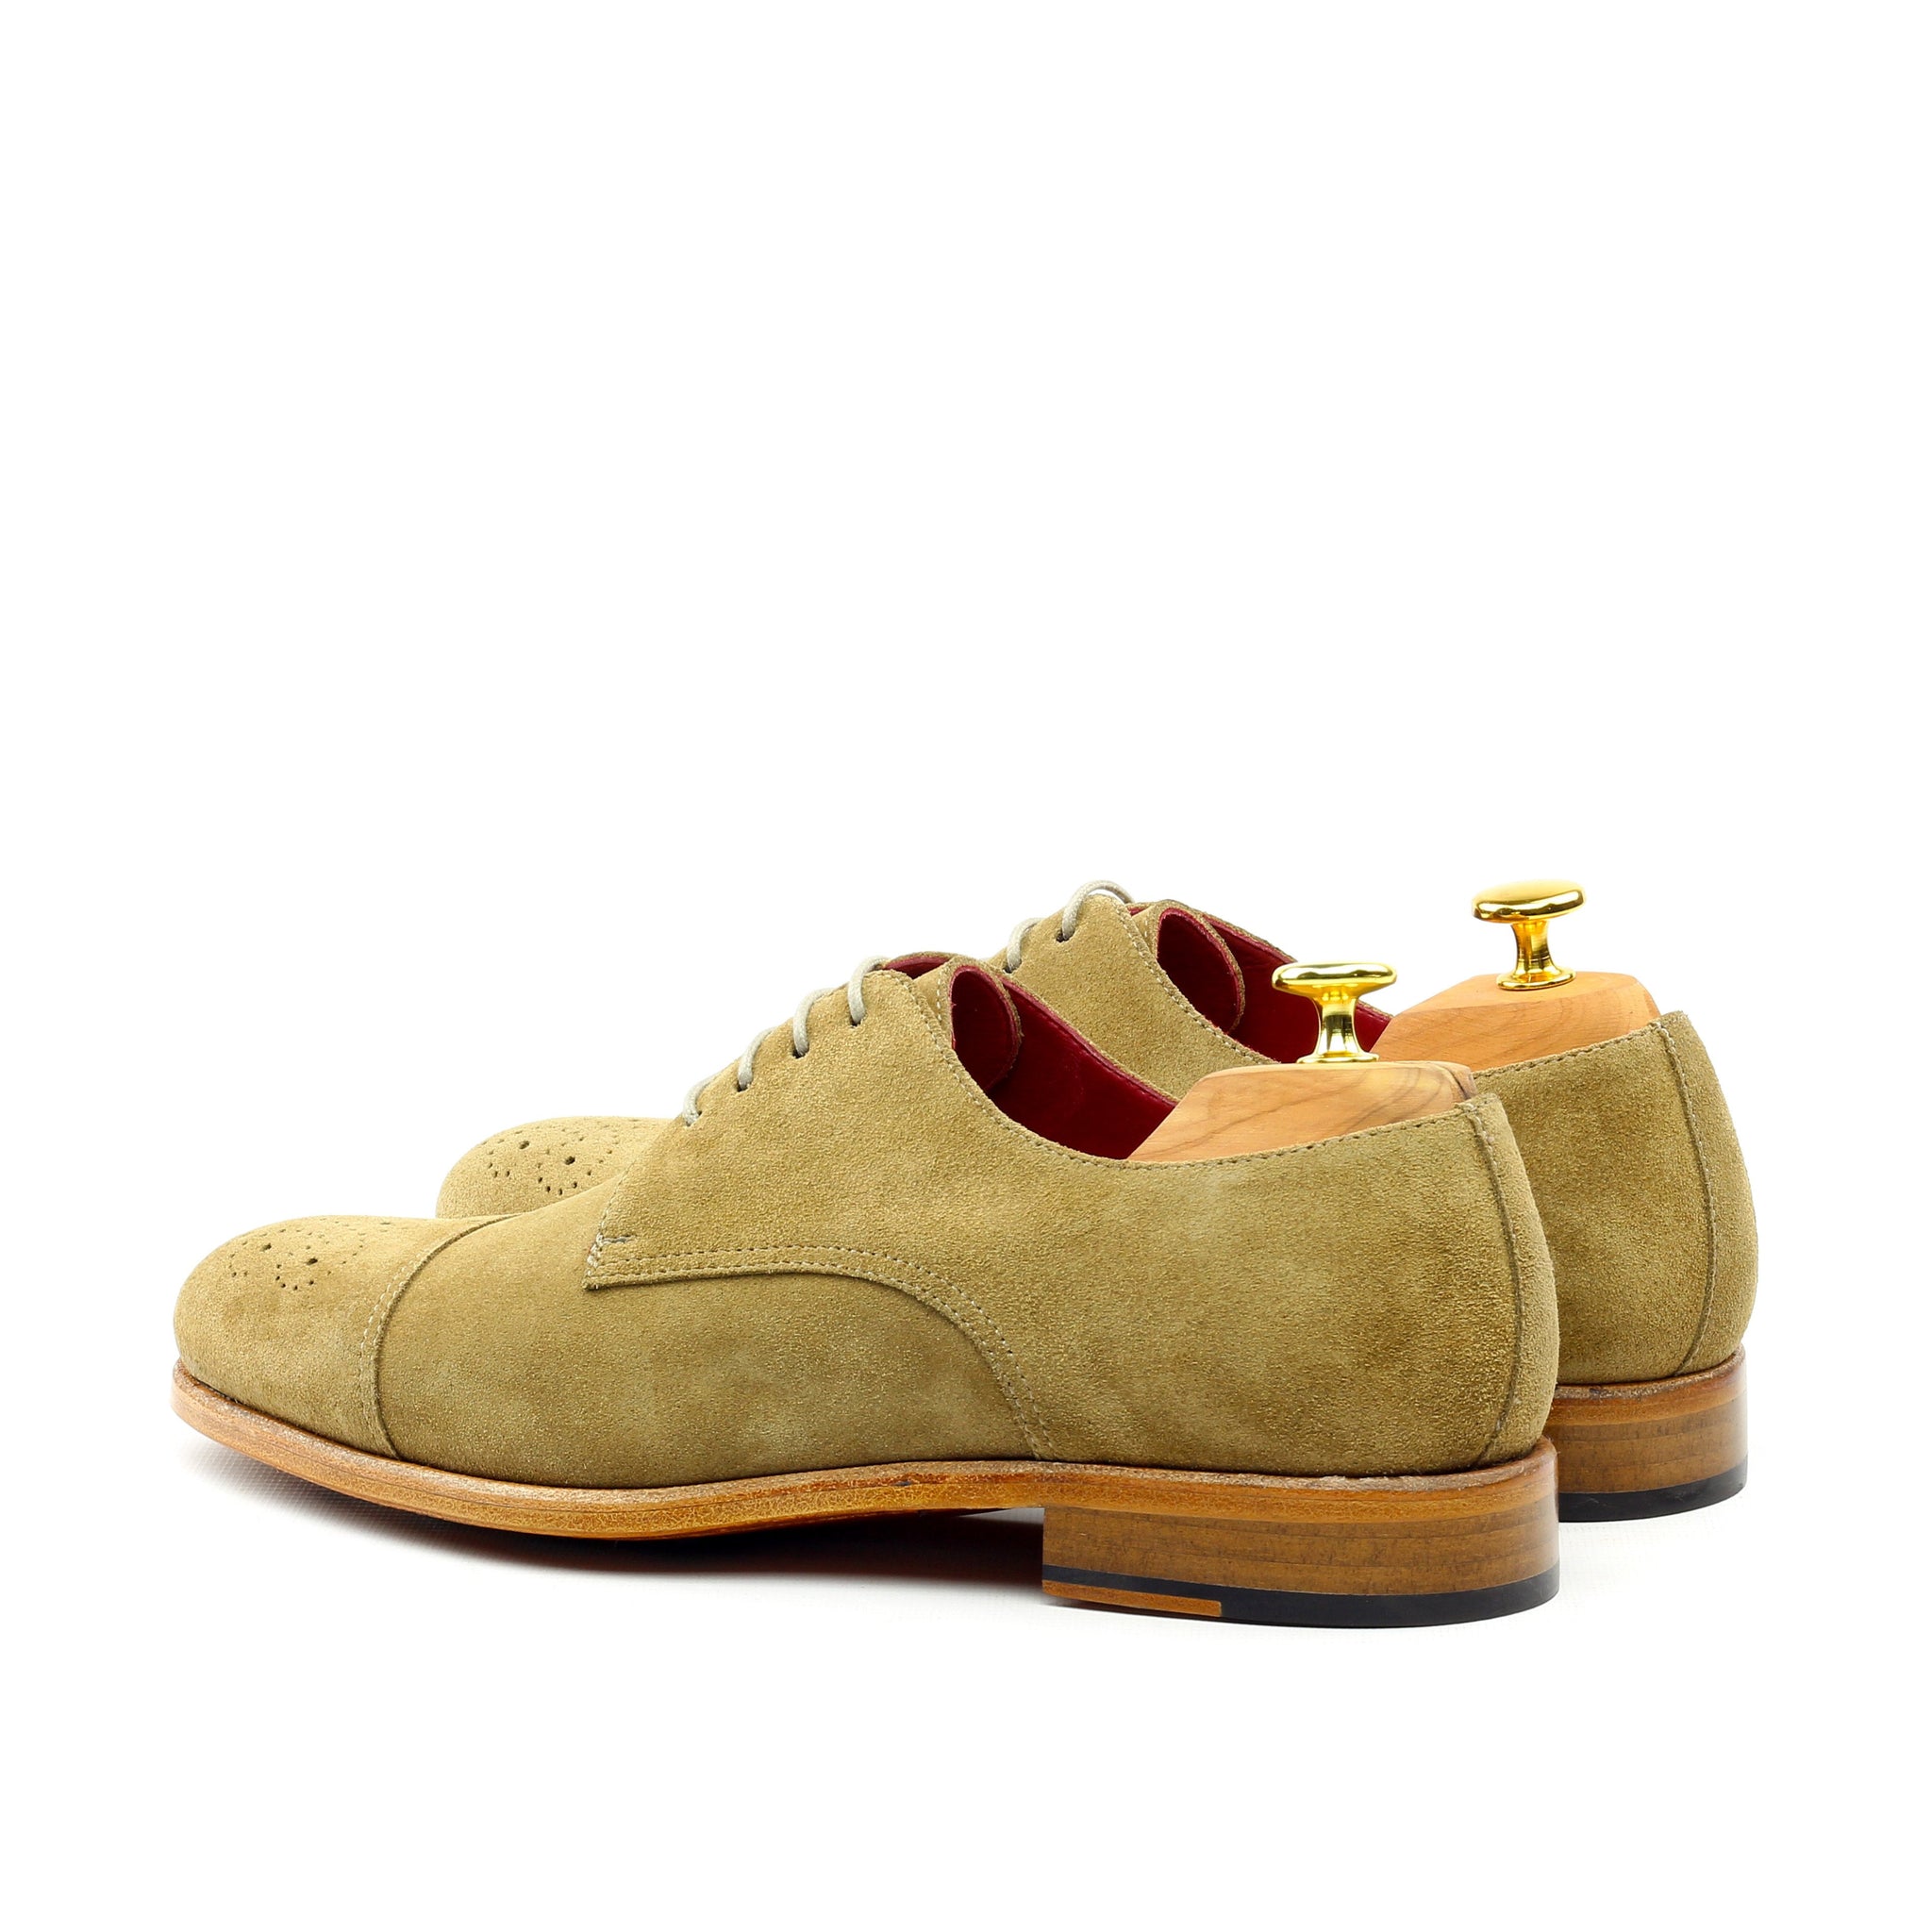 GOLD DUST - Unique Handcrafted Golden Brown Brogue Classic Oxford w/ Cap Toe